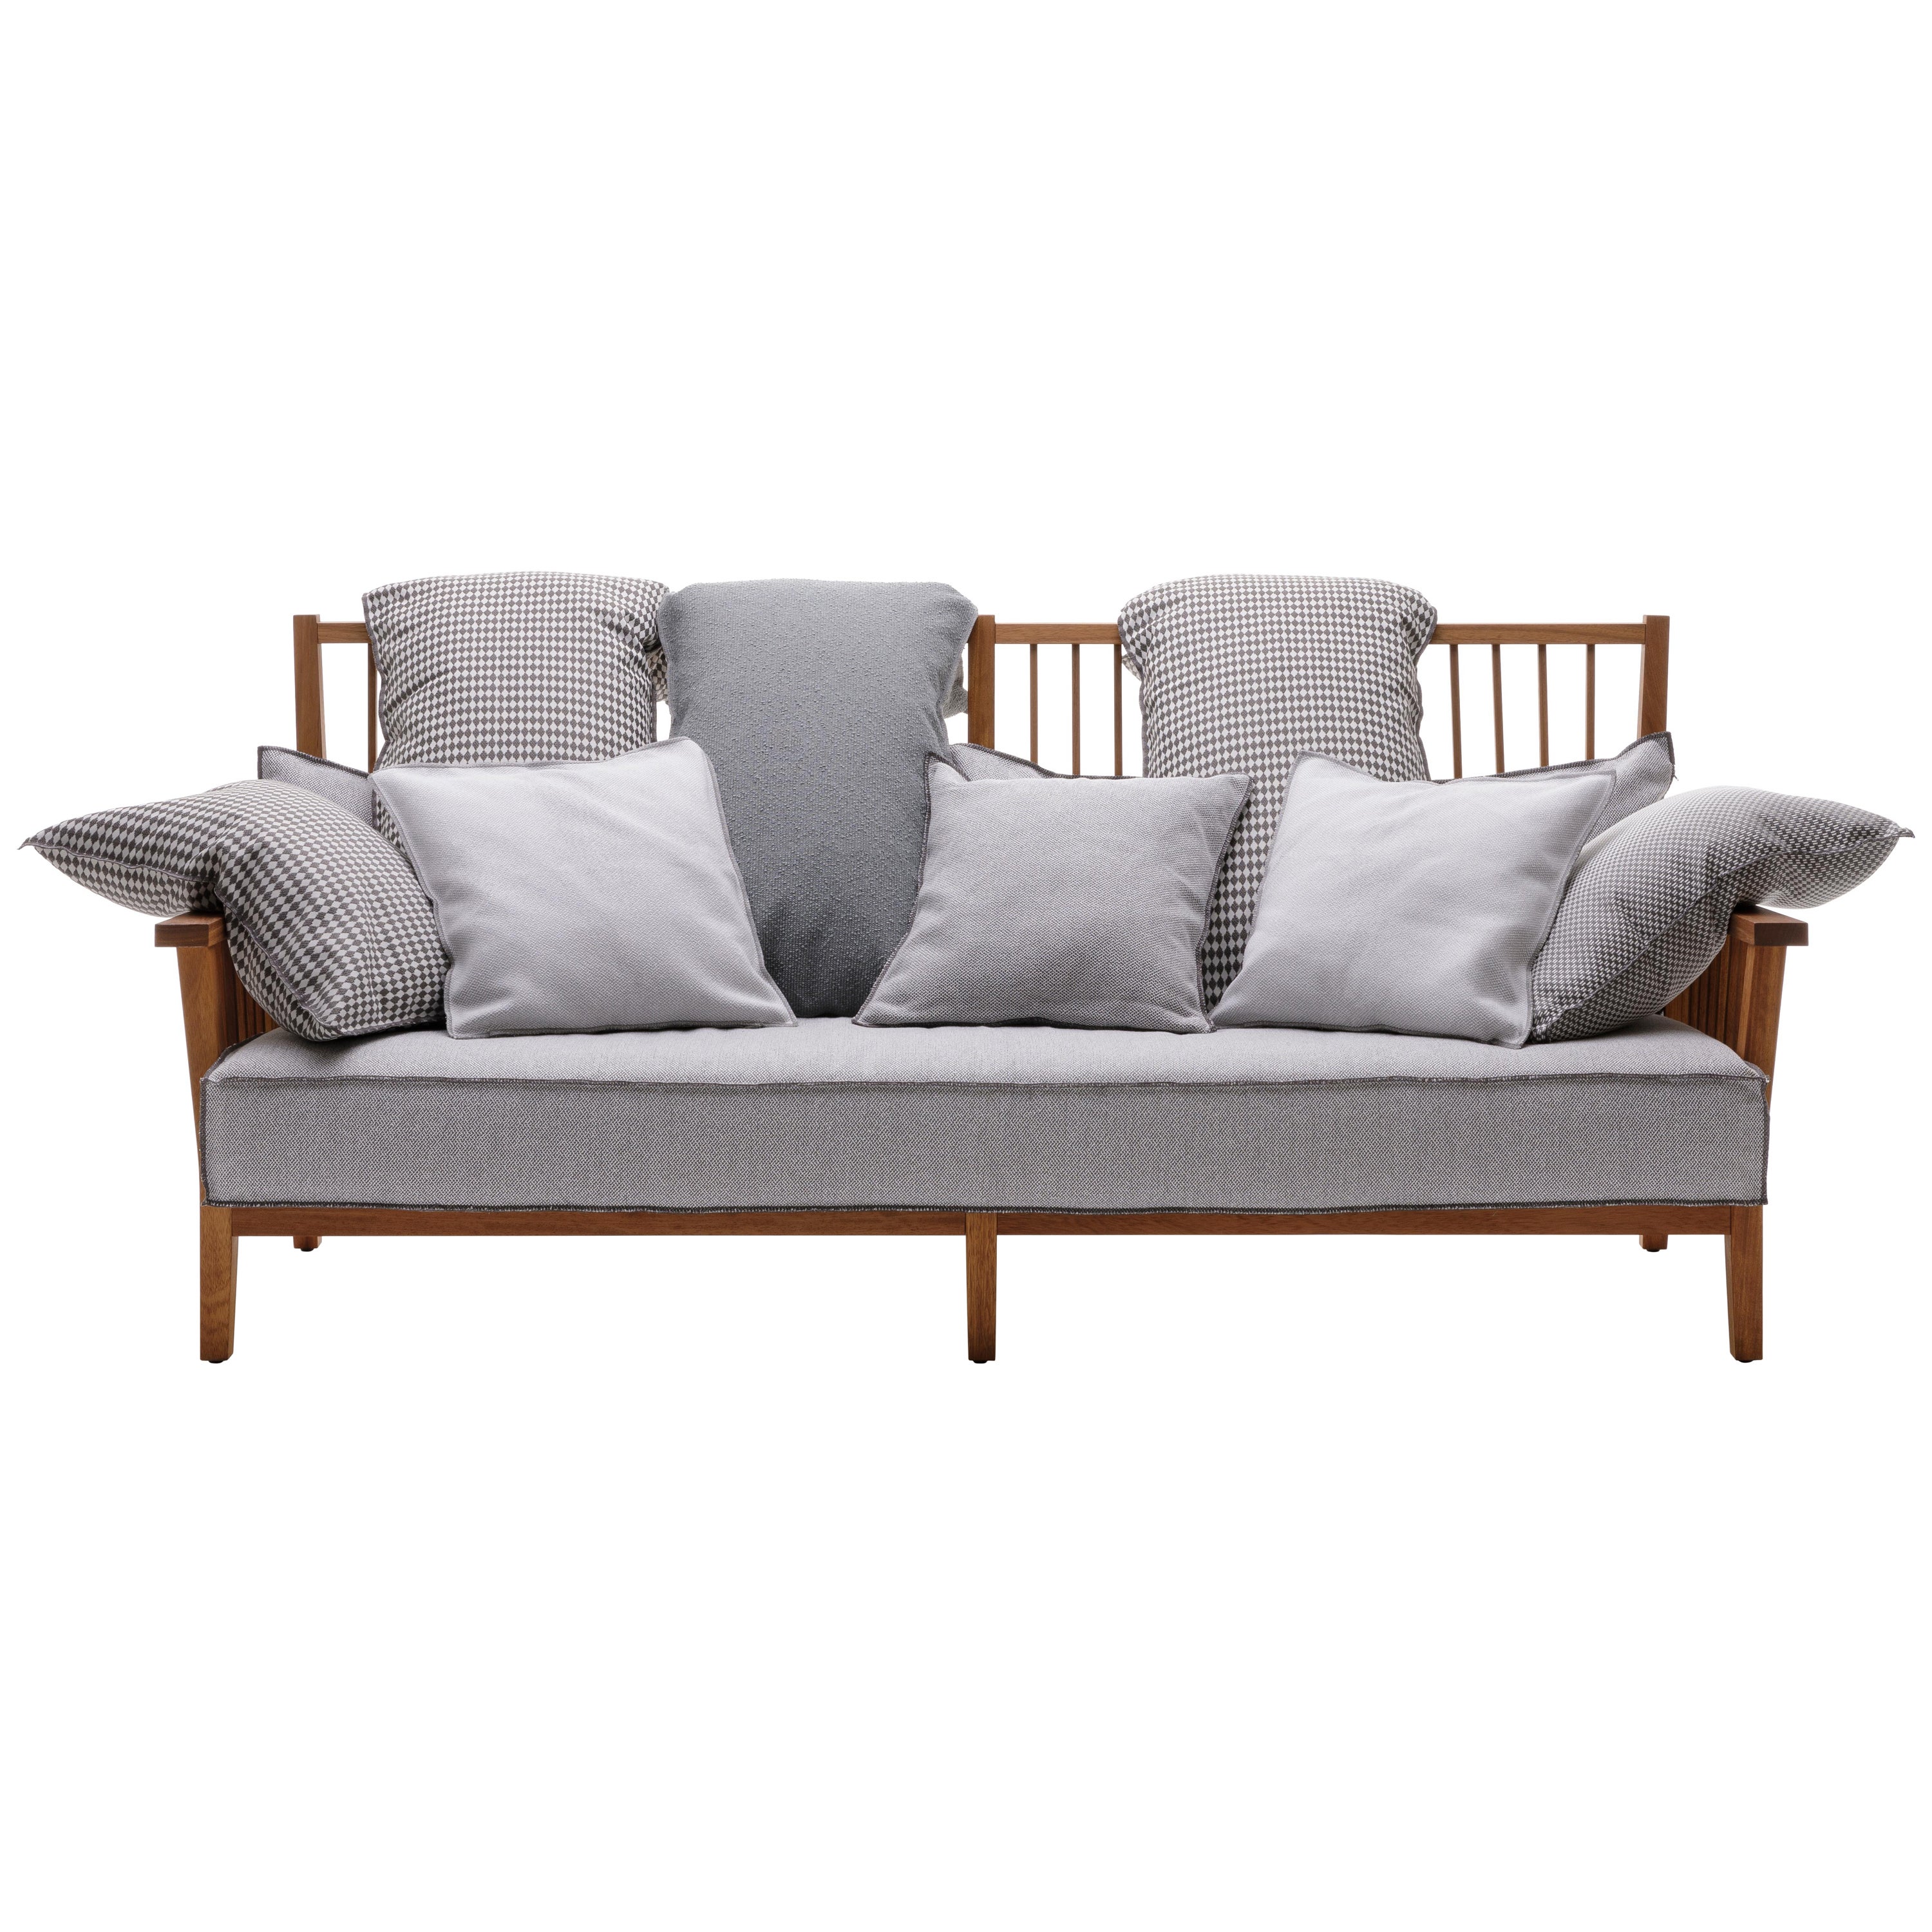 Gervasoni Inout Sofa in Oslo 04 Upholstery and Oiled Iroko Frame by Paola Navone For Sale